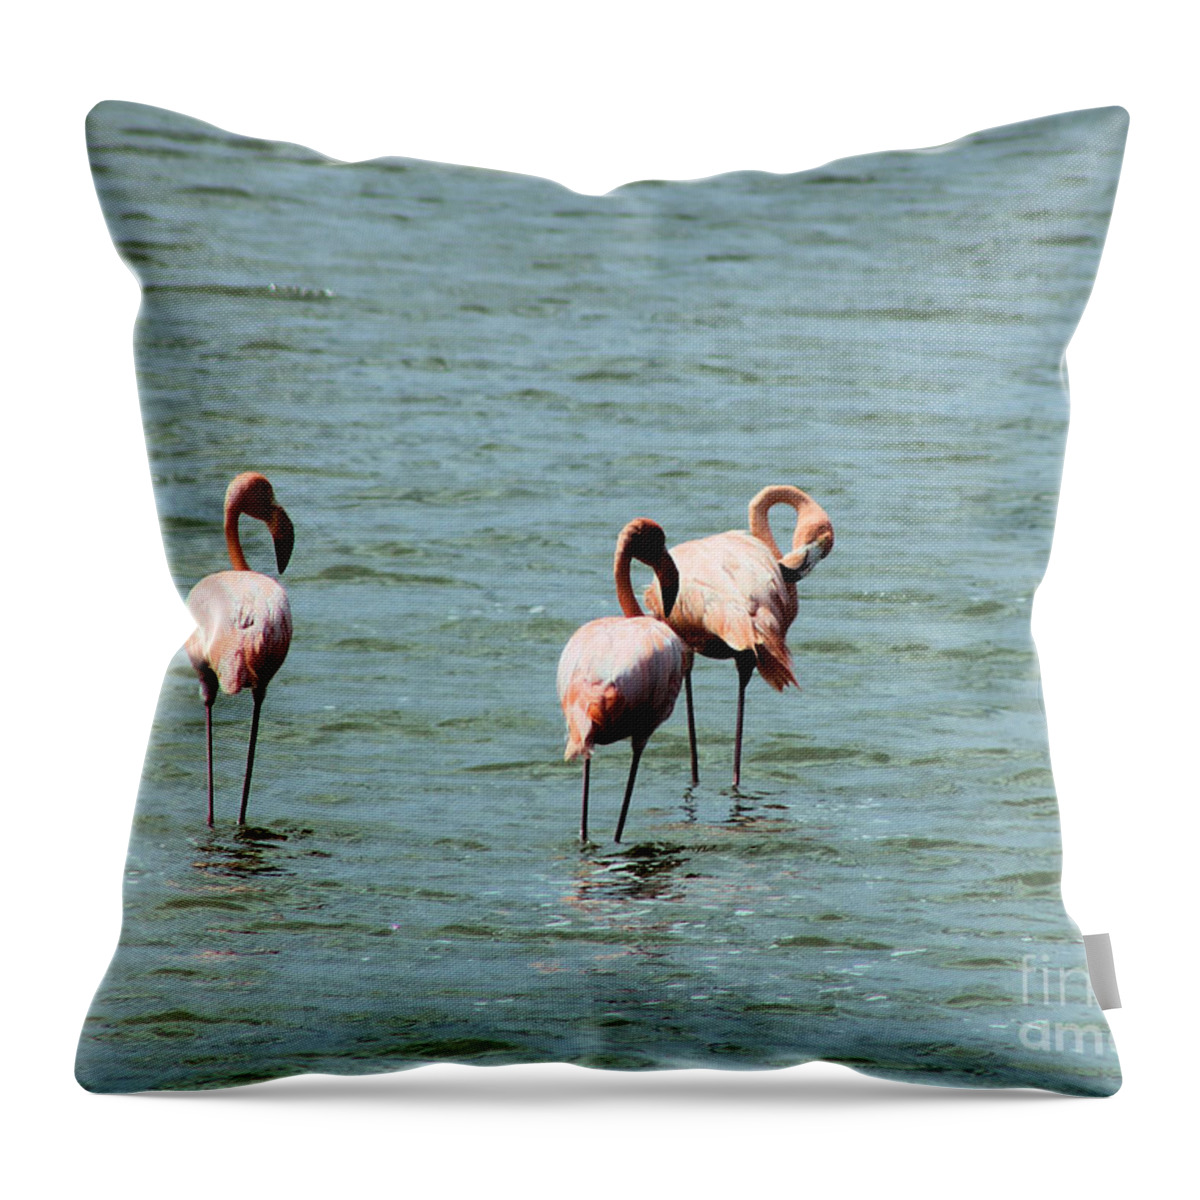 Flamingos Throw Pillow featuring the photograph Flamingos Gathering Together by Christy Gendalia